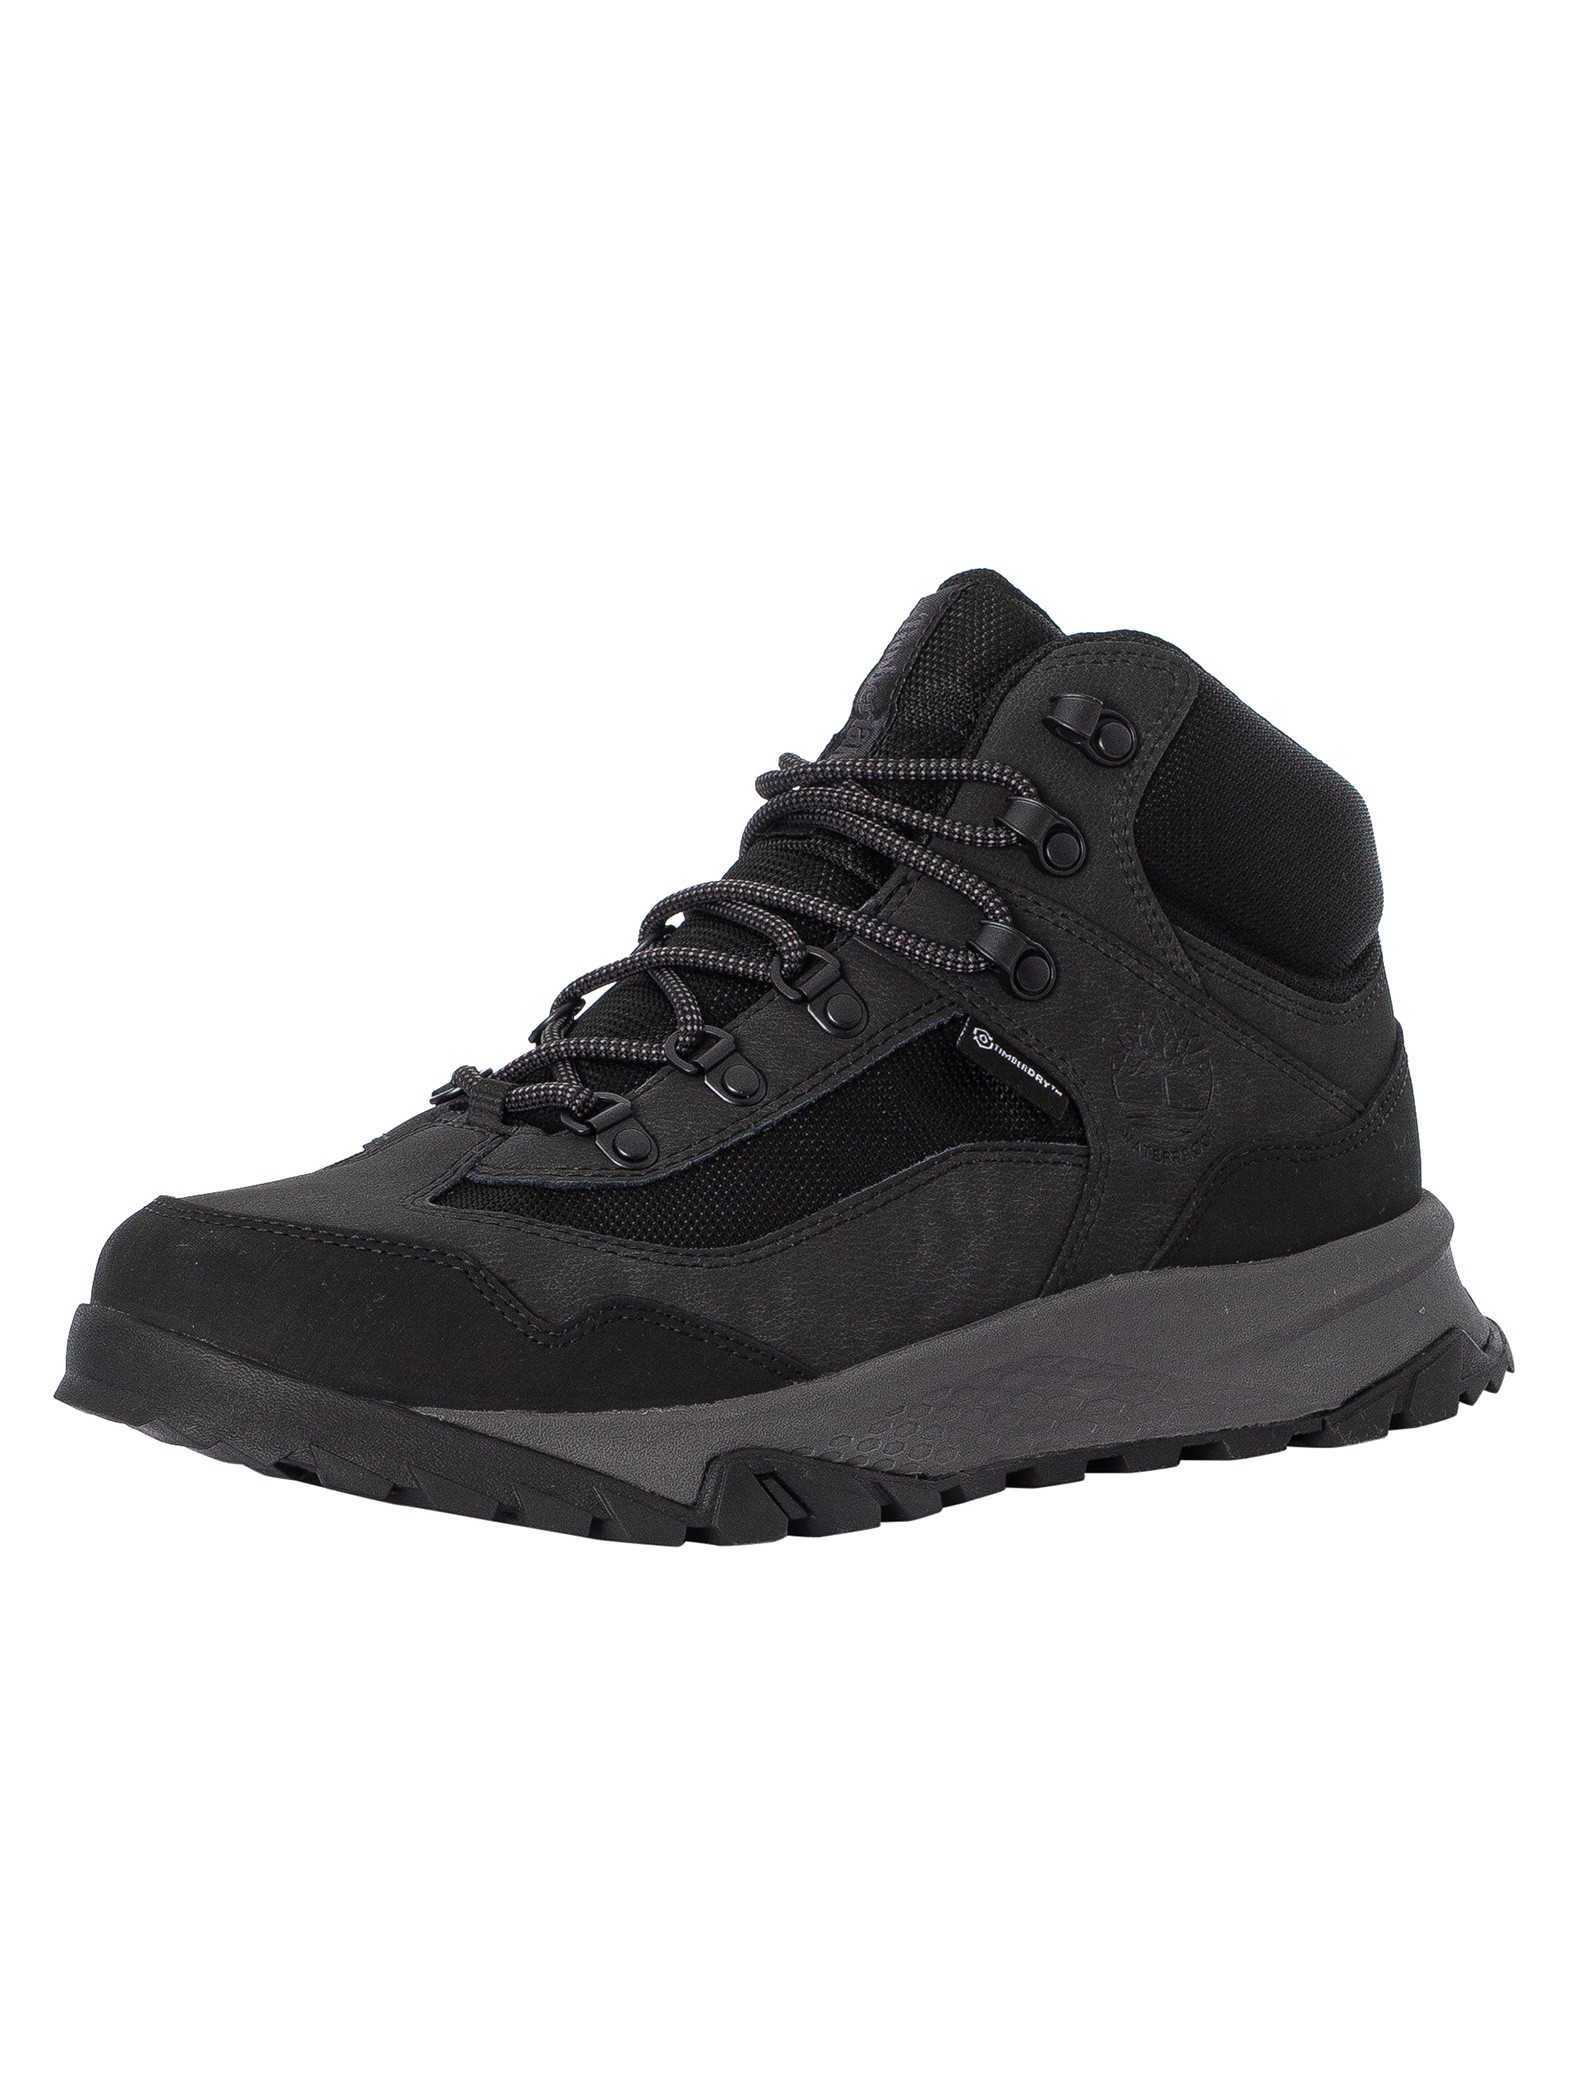 Lincoln Peak Mid Hiker Boots product